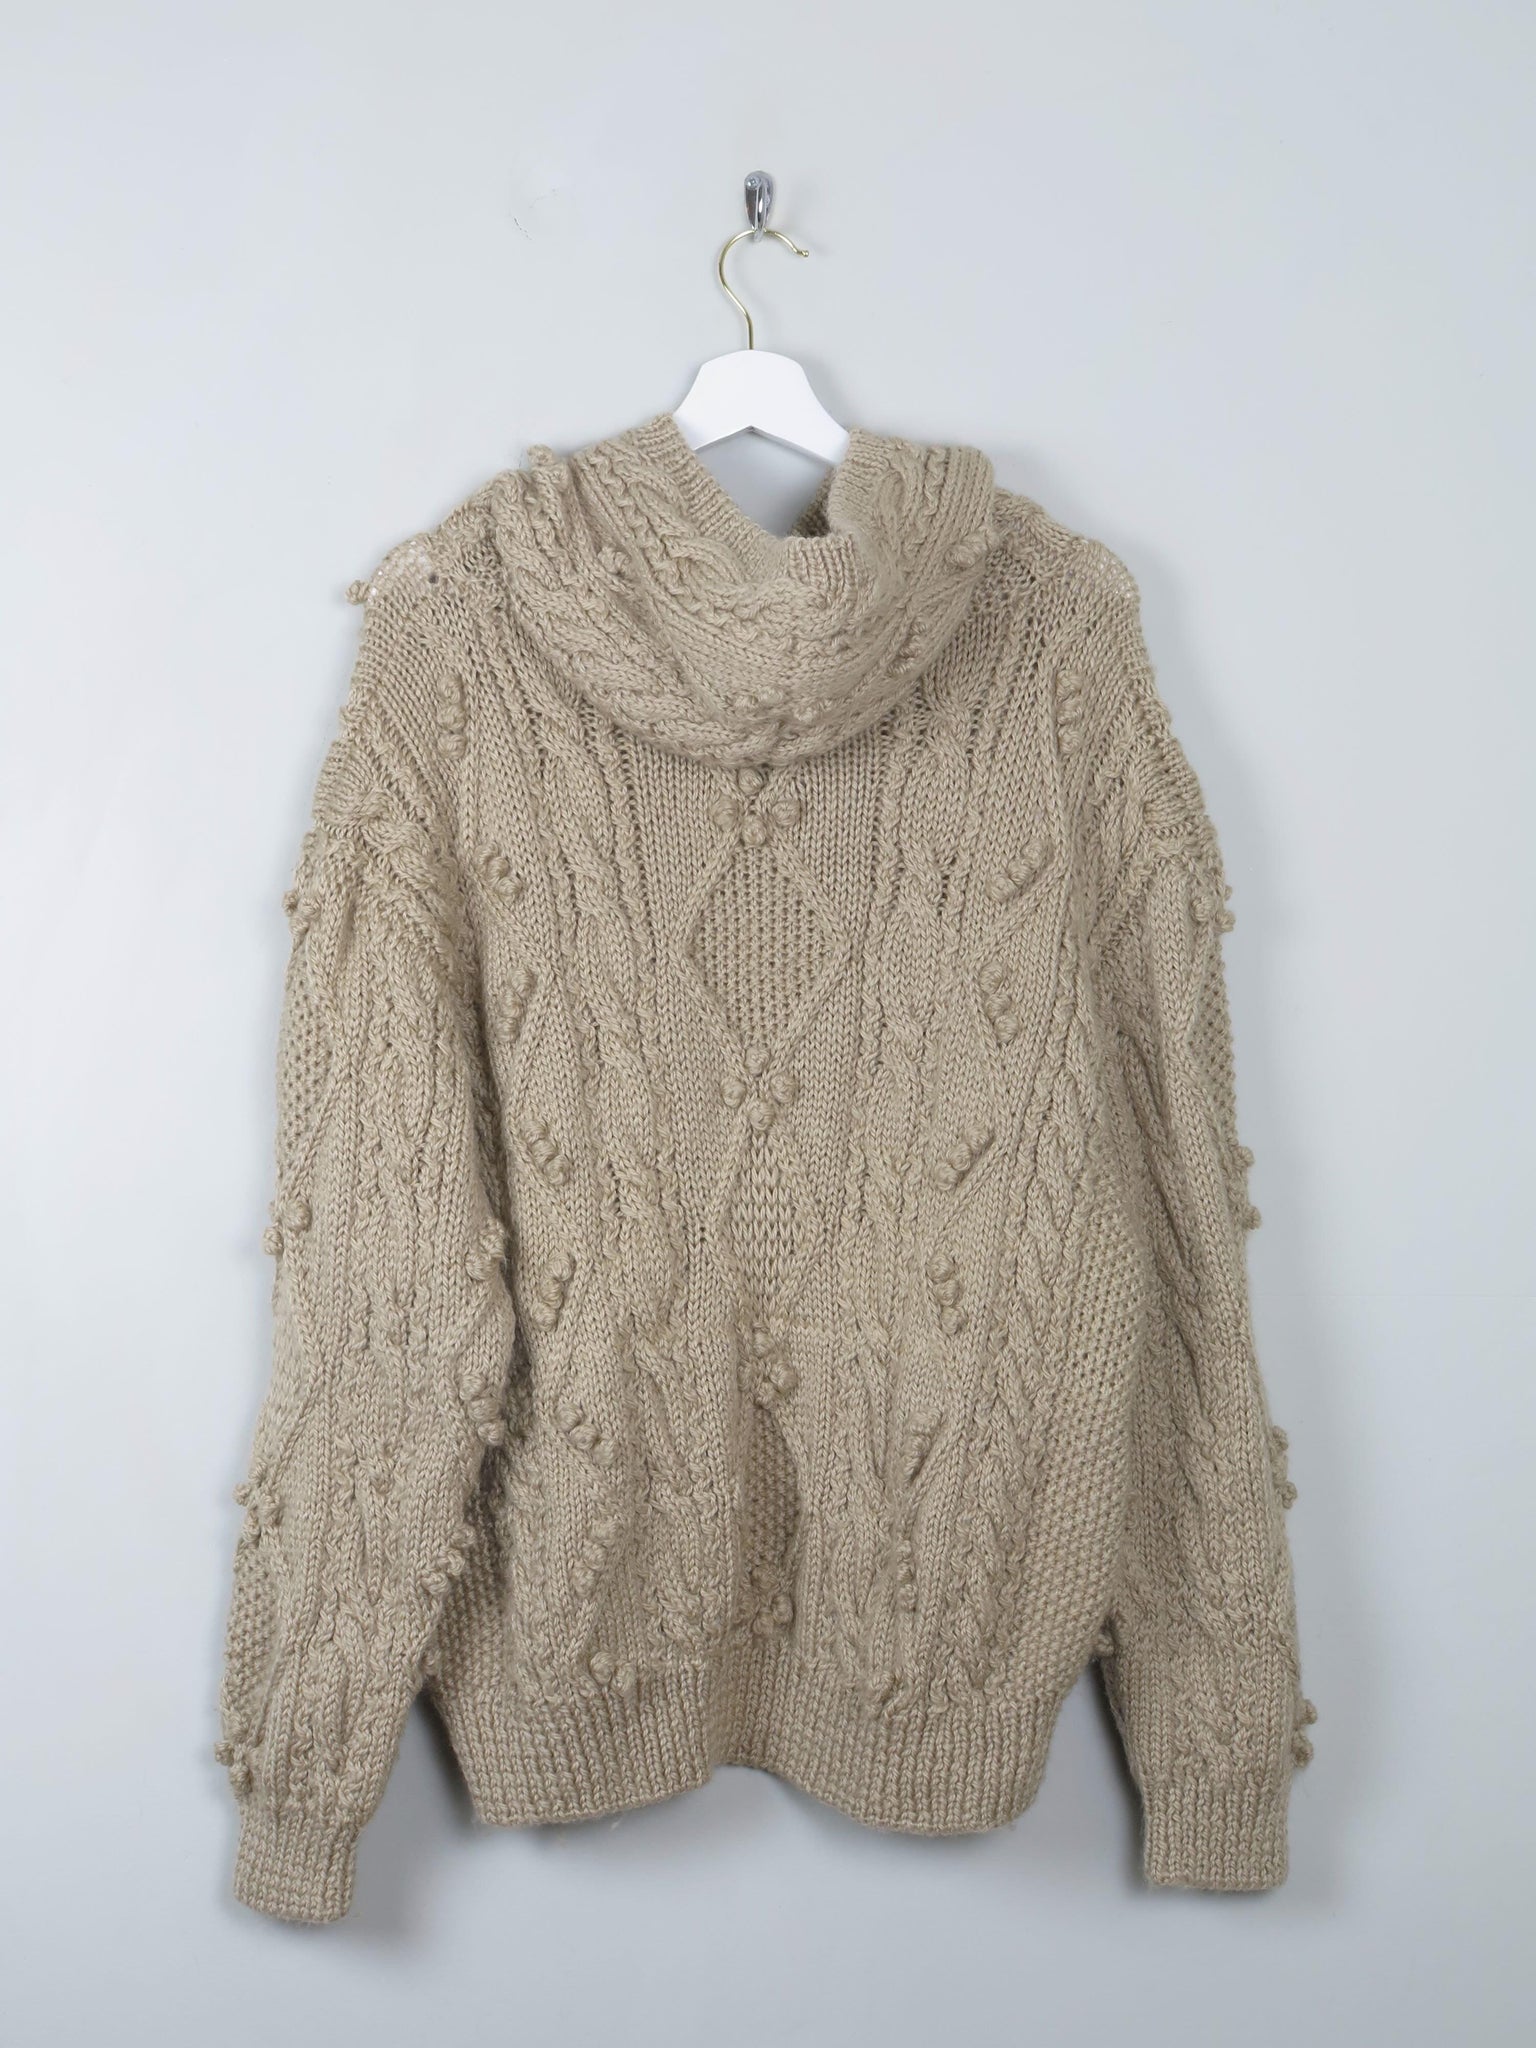 Women's Vintage Hooded Hand-knit  Wool Jumper - The Harlequin